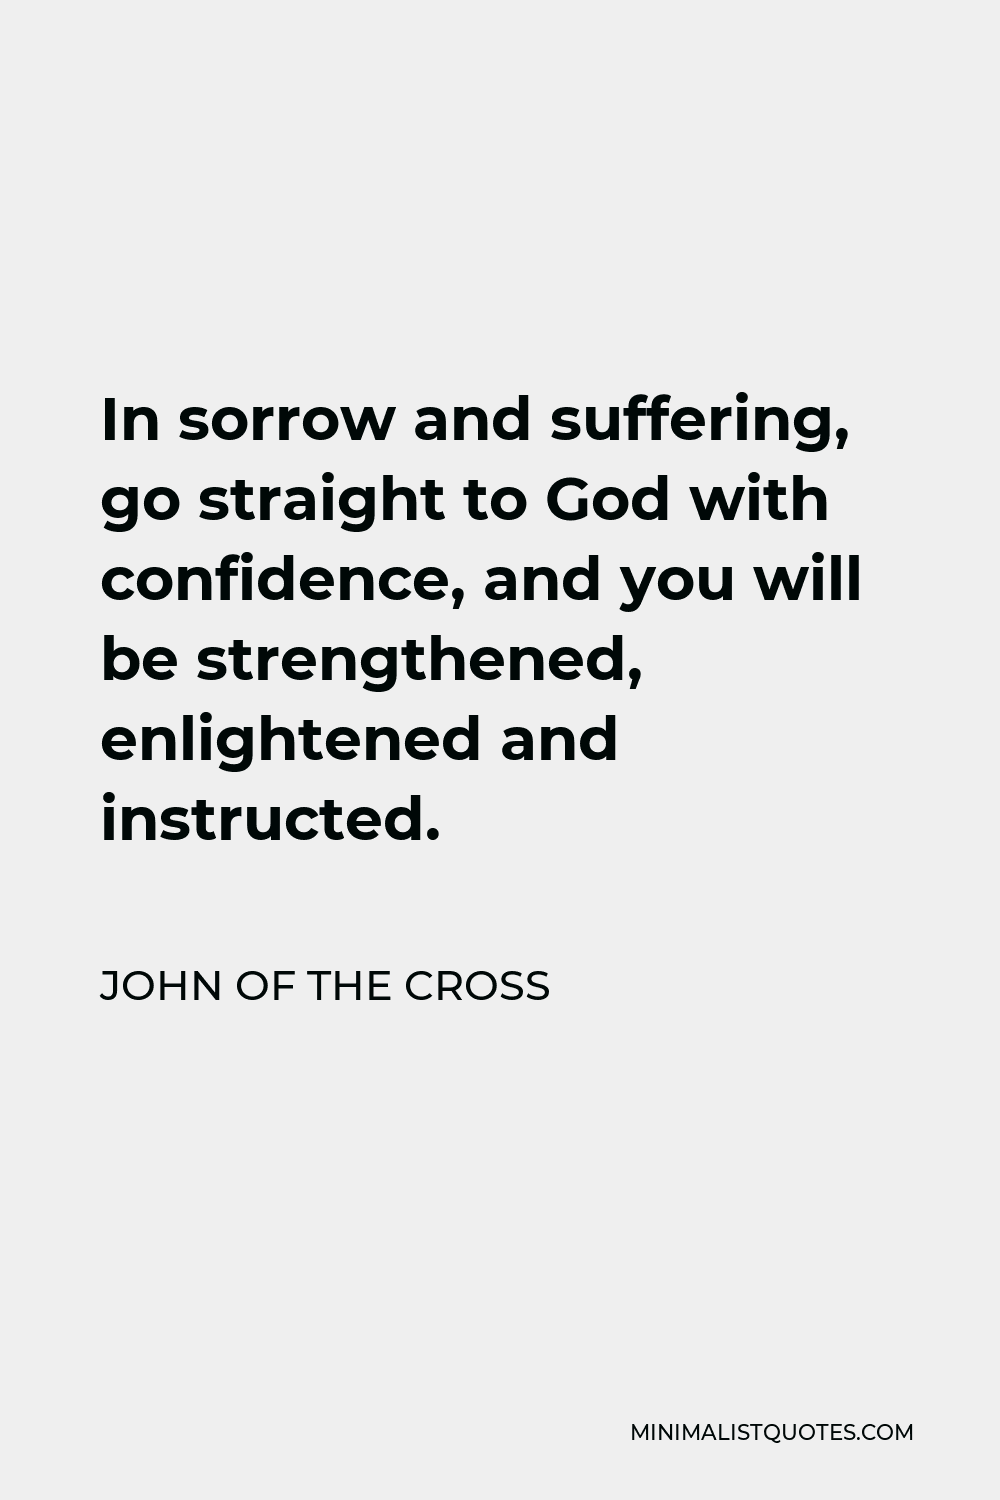 John of the Cross Quote - In sorrow and suffering, go straight to God with confidence, and you will be strengthened, enlightened and instructed.